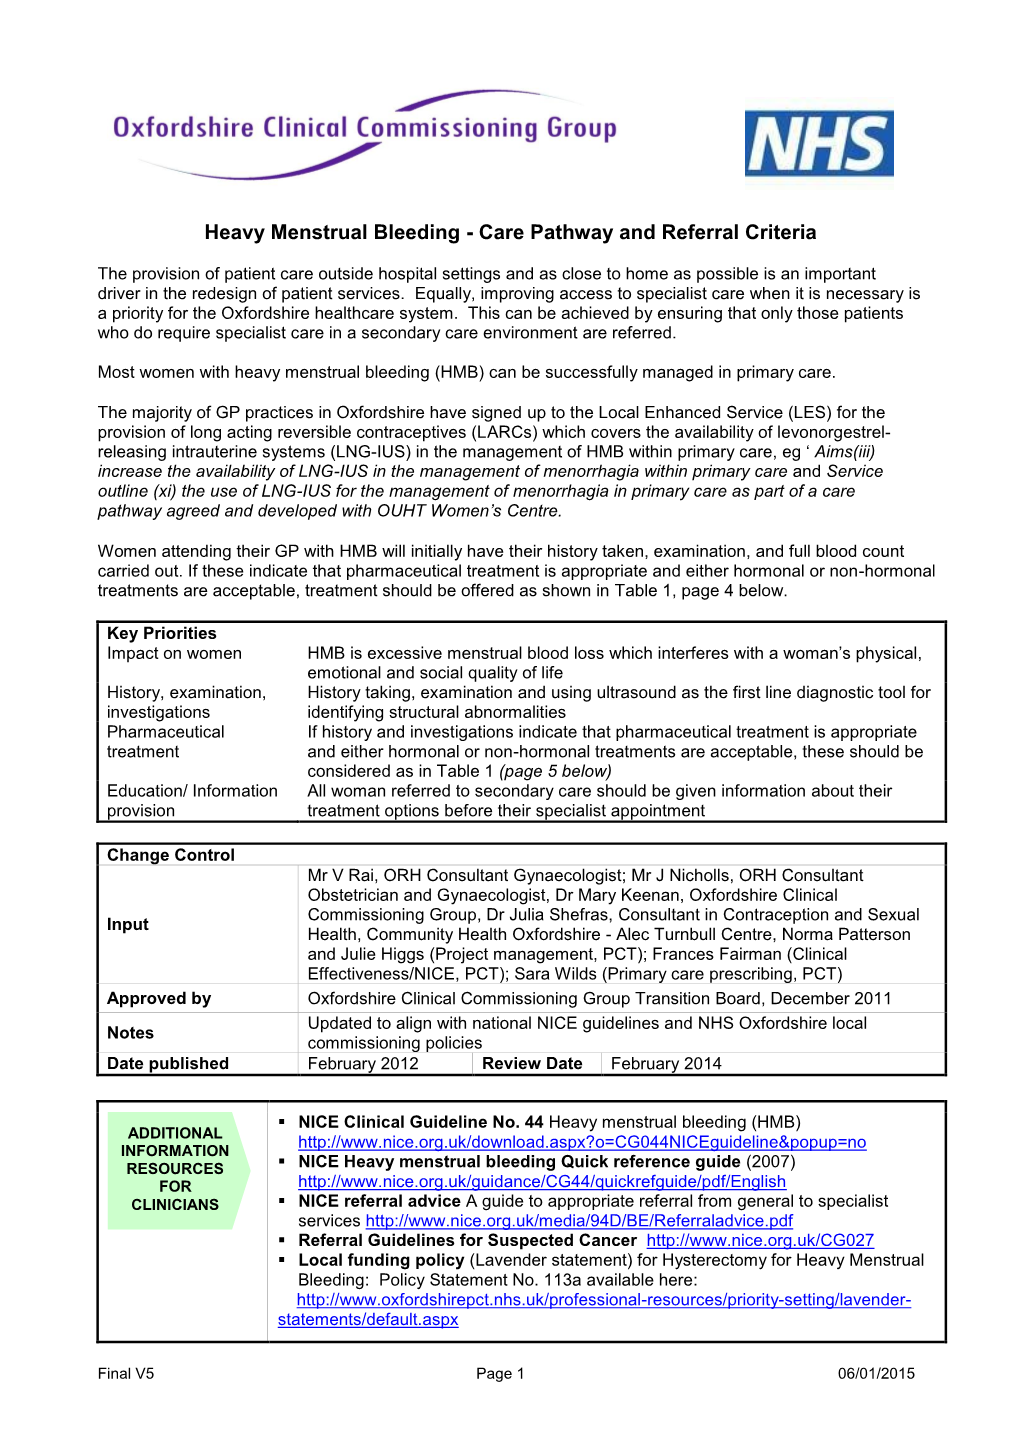 Guidelines for Heavy Menstrual Bleeding Primary Care Pathway